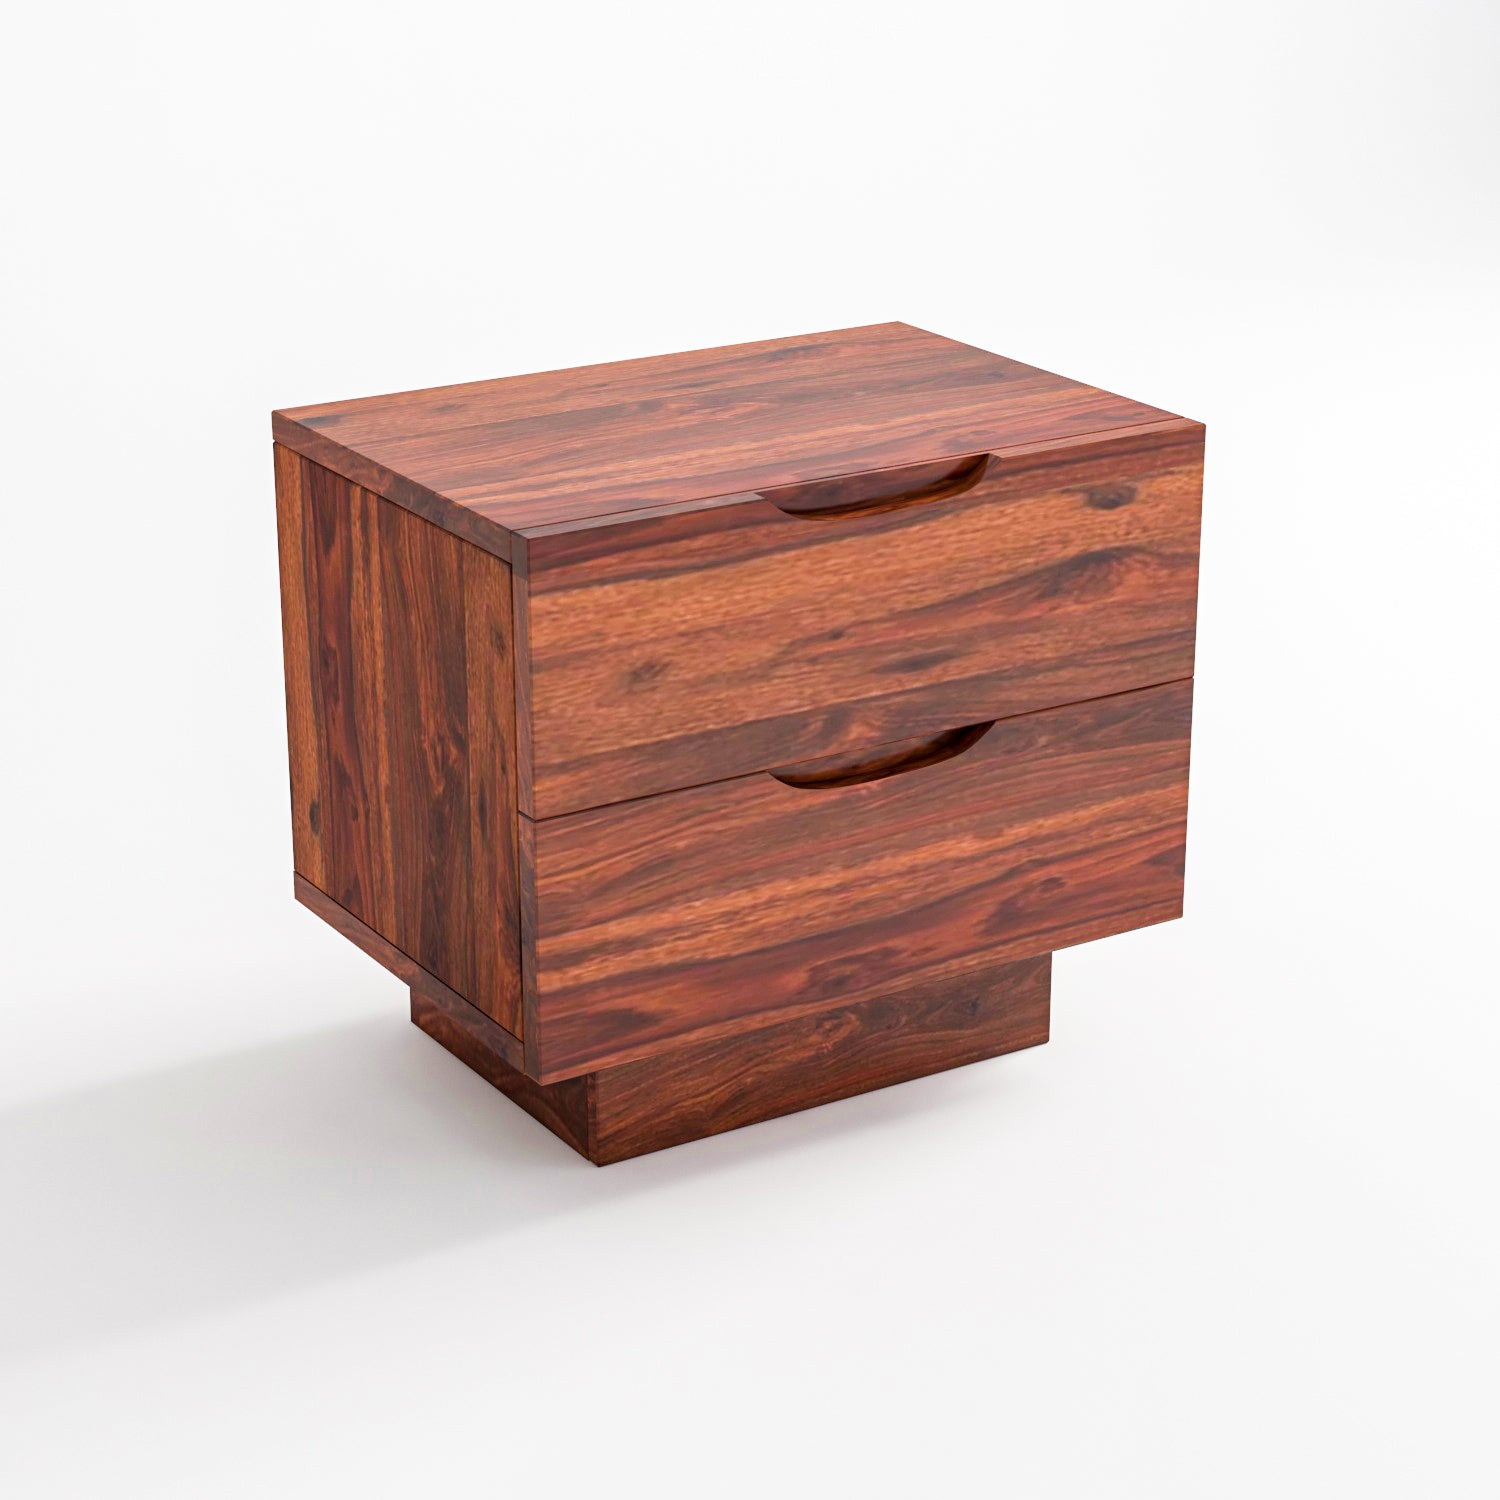 Maria Solid Sheesham Wood Bedside Table With Two Drawers (Natural Finish)